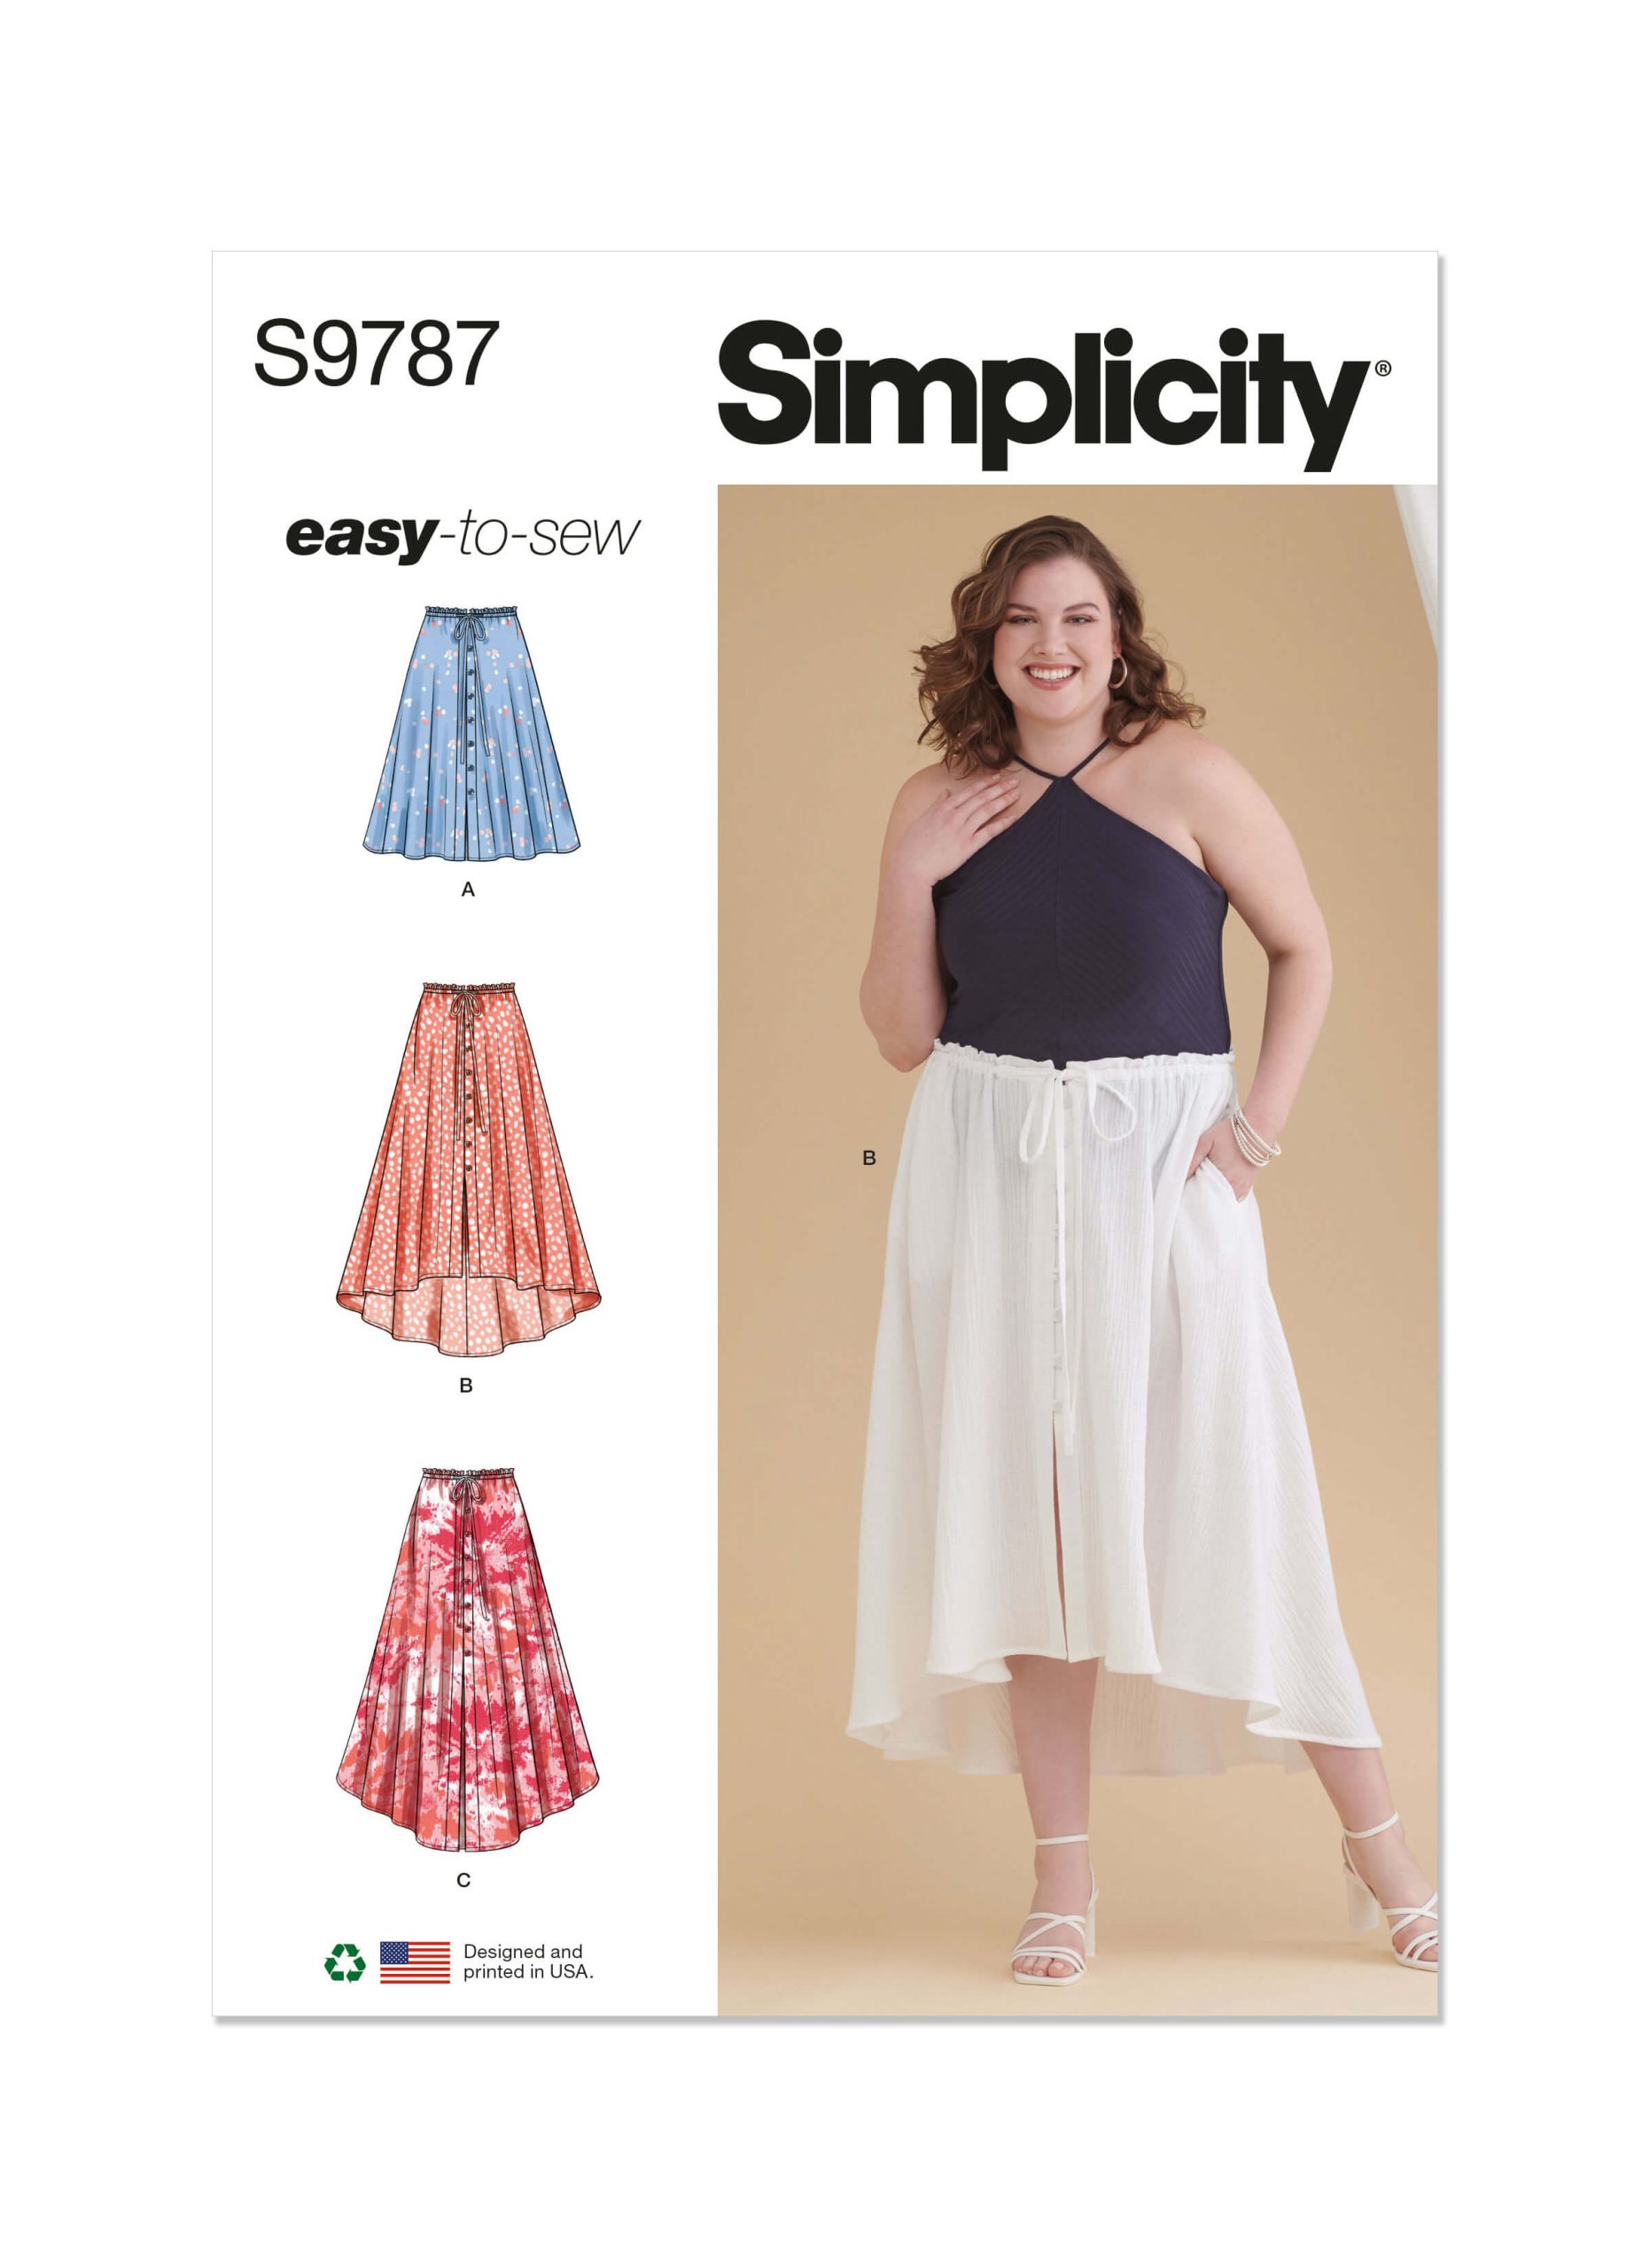 Simplicity Sewing Pattern S9787 Women's Skirt With Hemline Variations